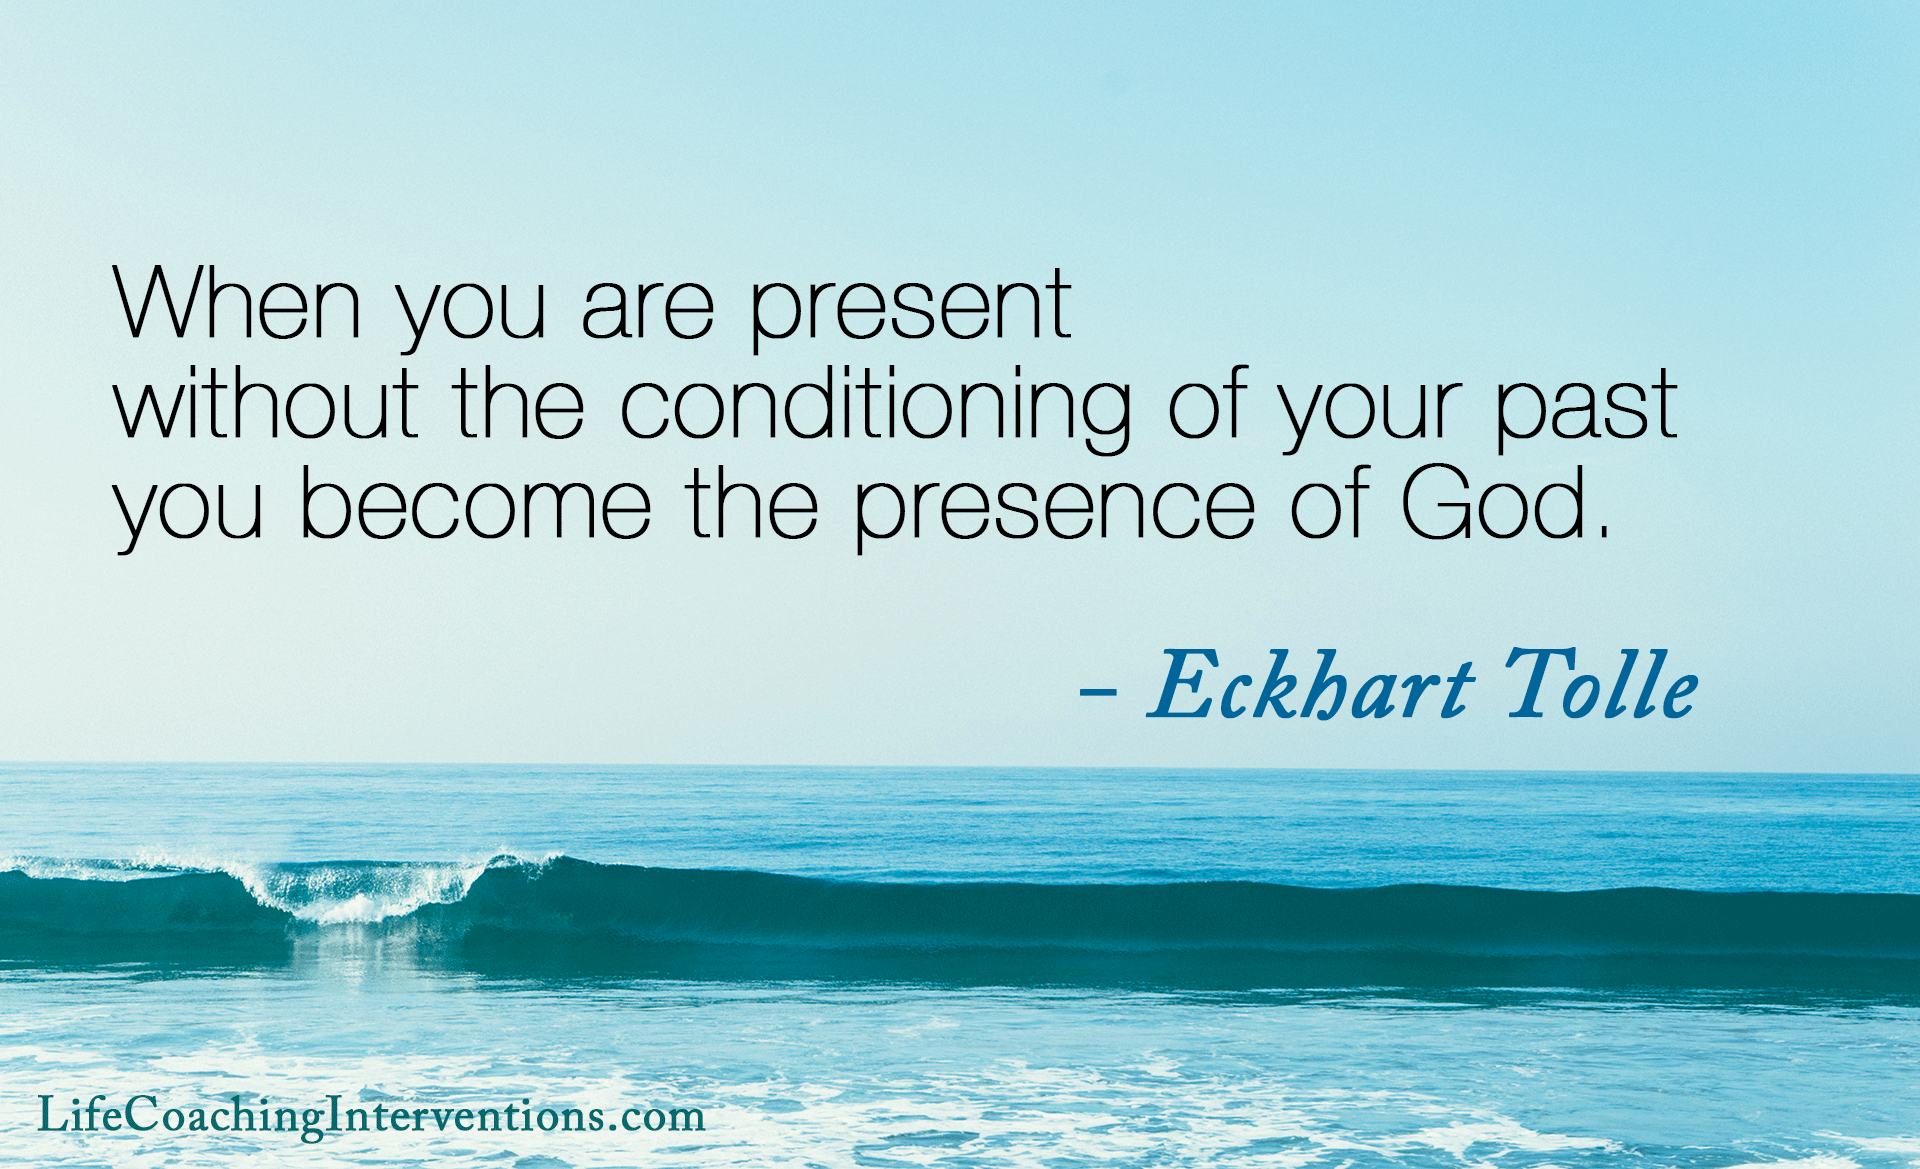 Eckhart Tolle quotes - presence of God